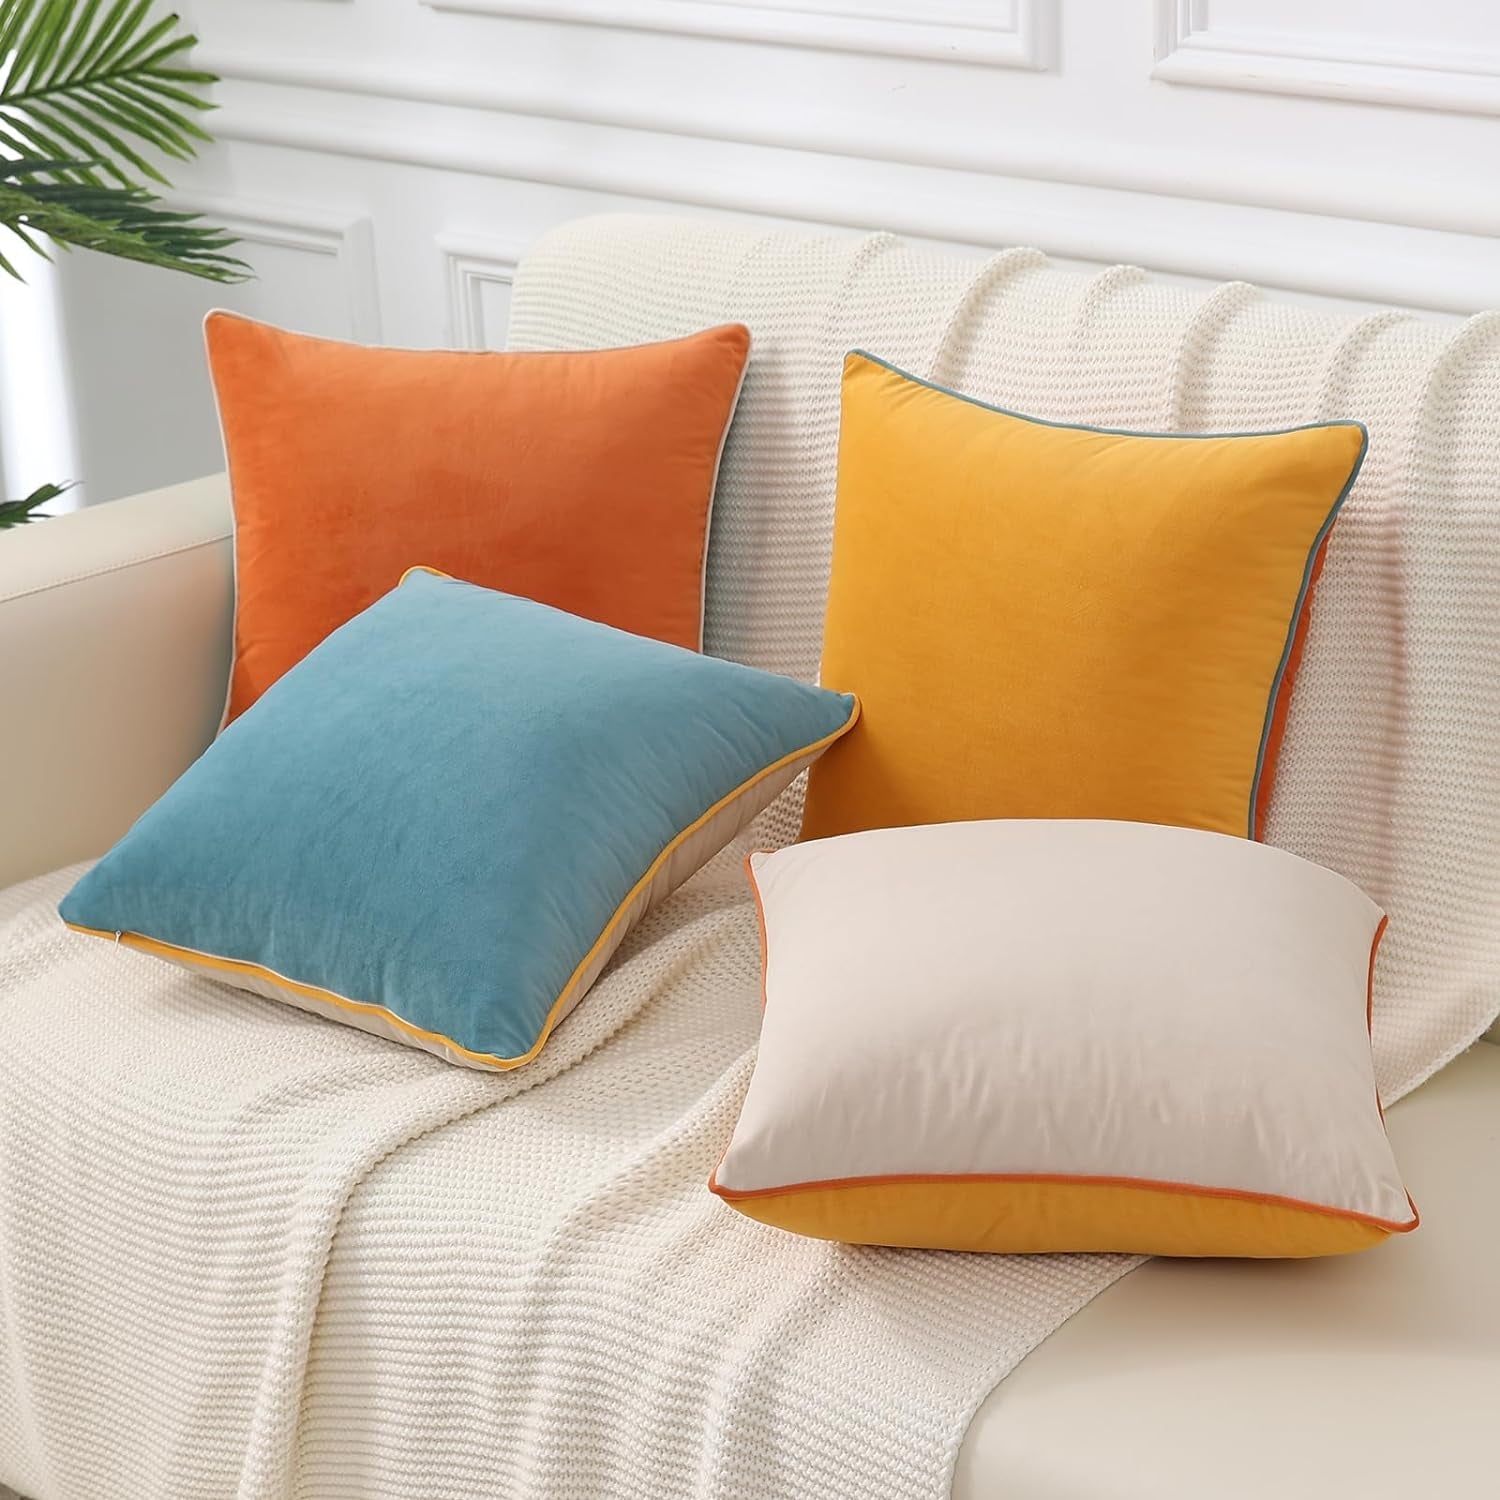 Mecatny Soft Velvet Throw Pillow Covers 18X18 Inch Set of 4, Colorful Decorative Pillow Covers for Sofa Bed, Modern Couch Pillow Covers with 4-Color Mix and Match for Living Room, Orange & Yellow